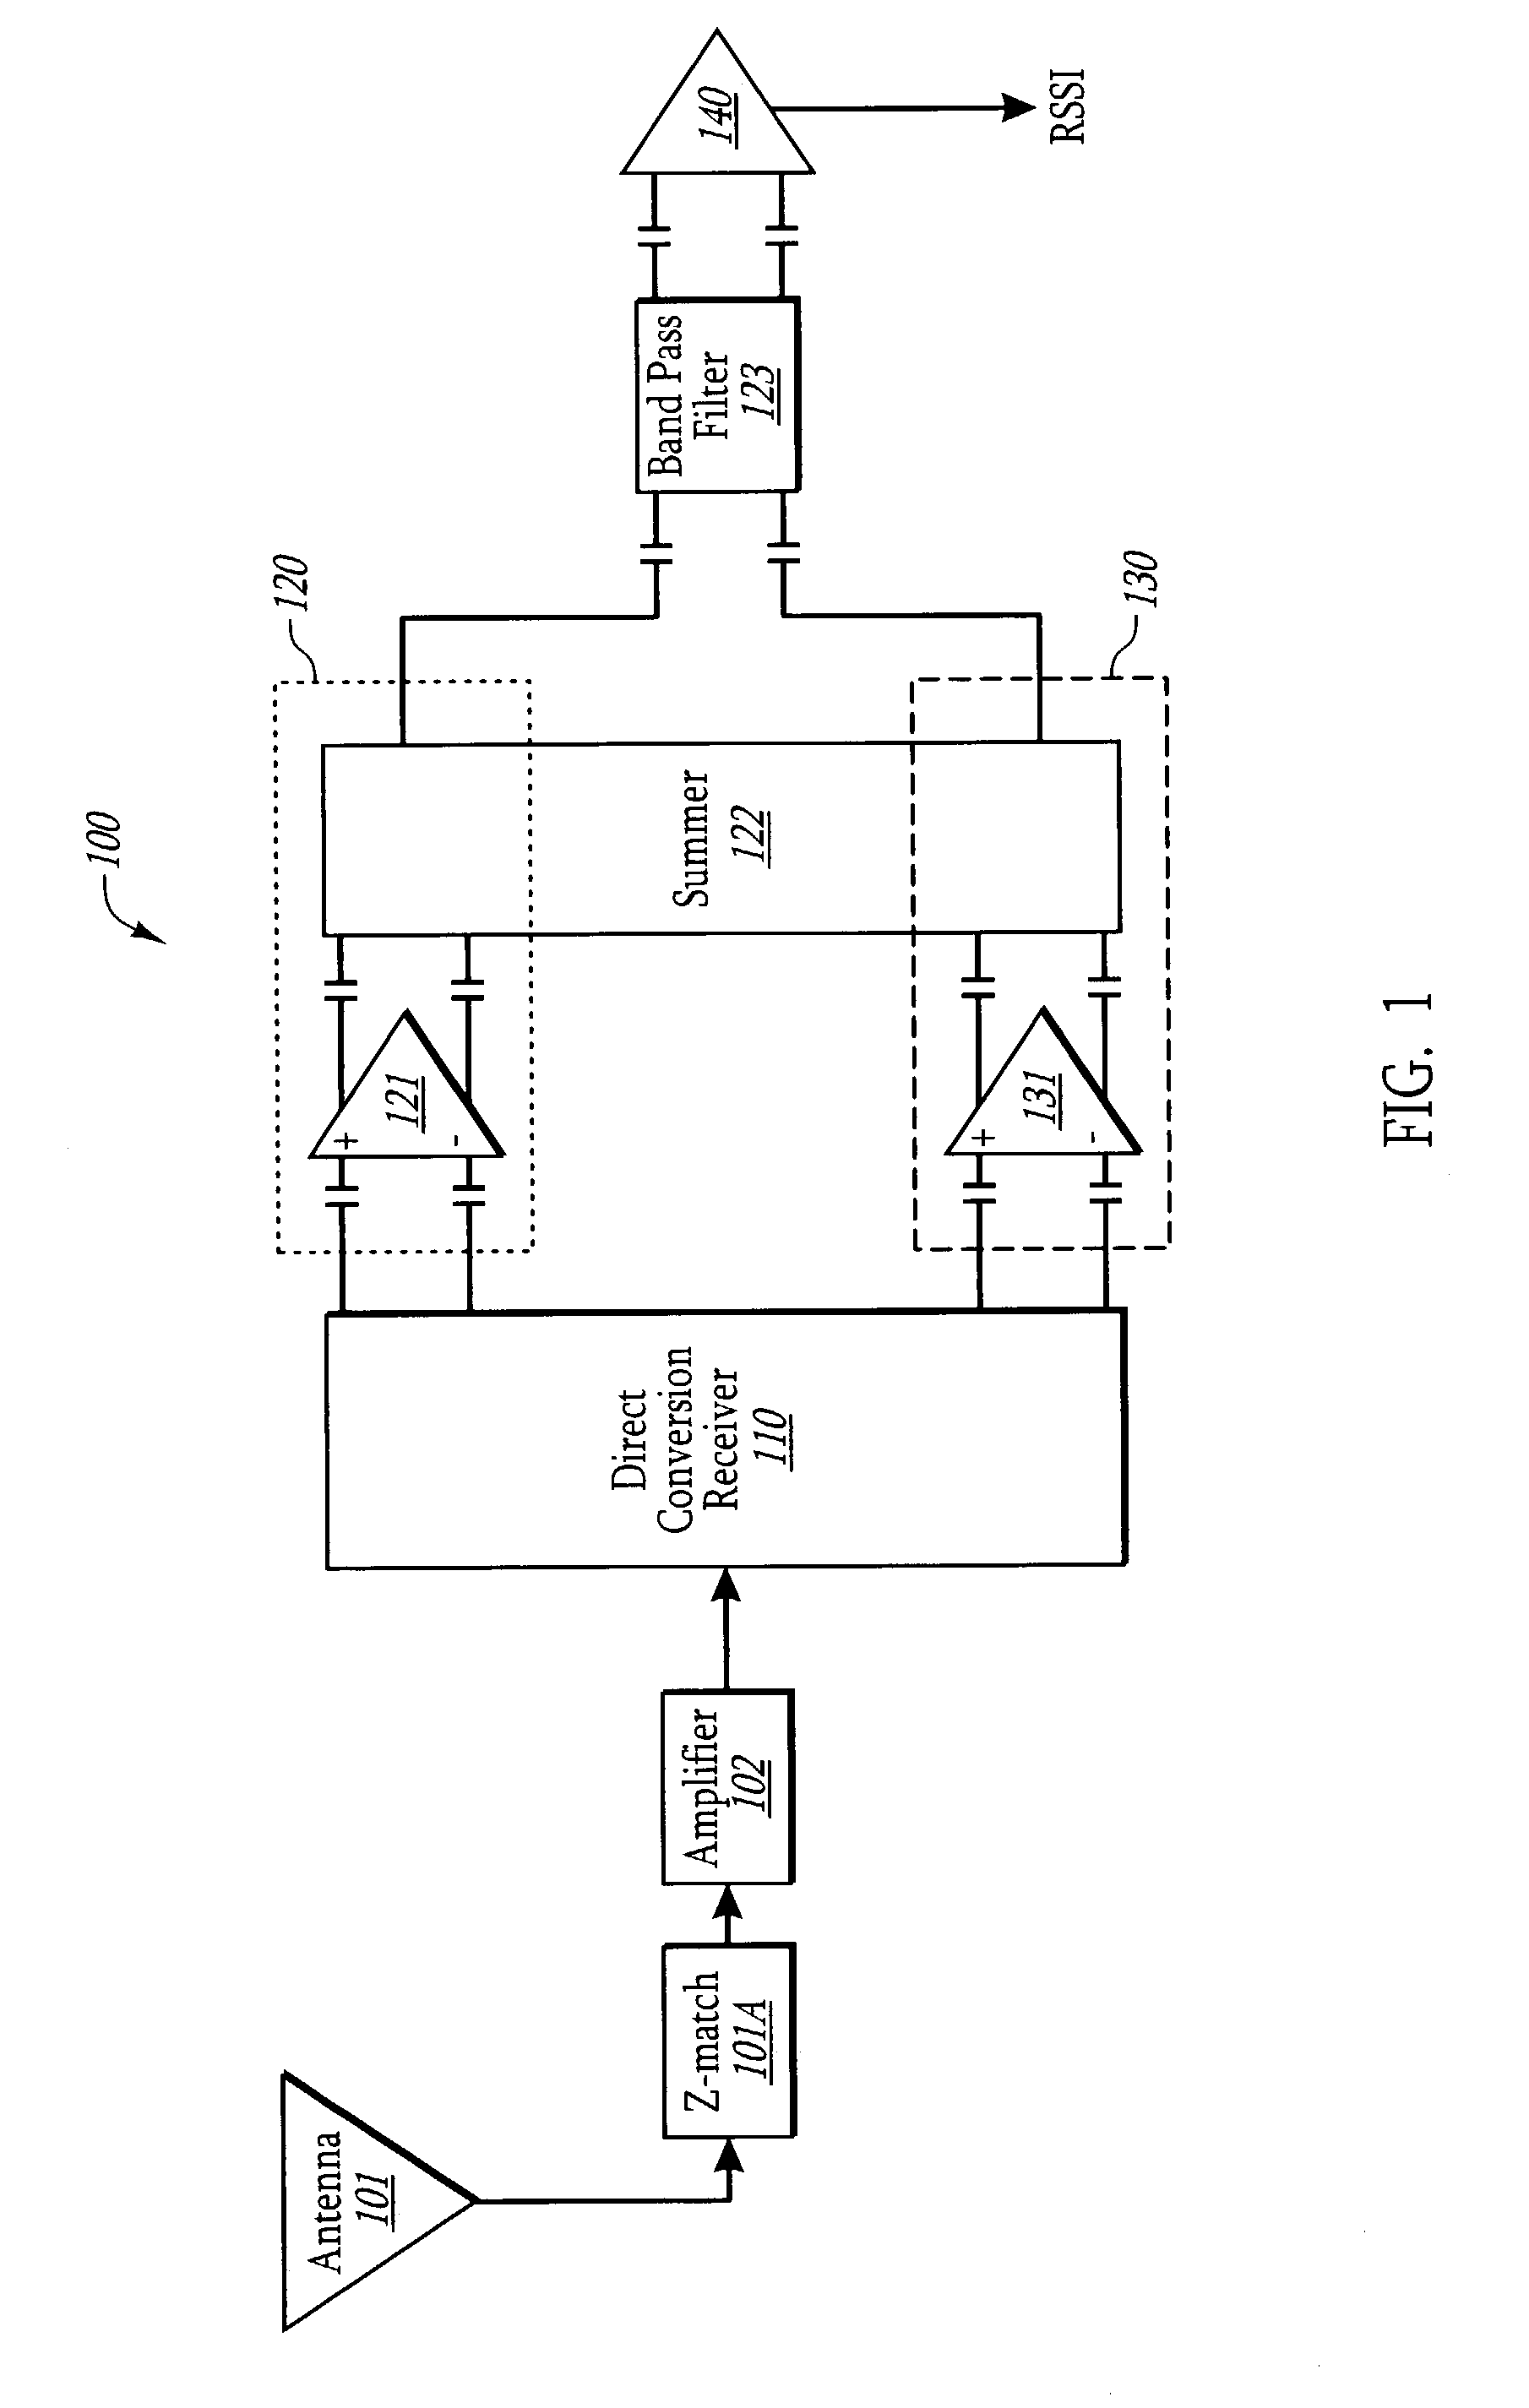 Direct conversion receiver for amplitude modulated signals using linear/log filtering